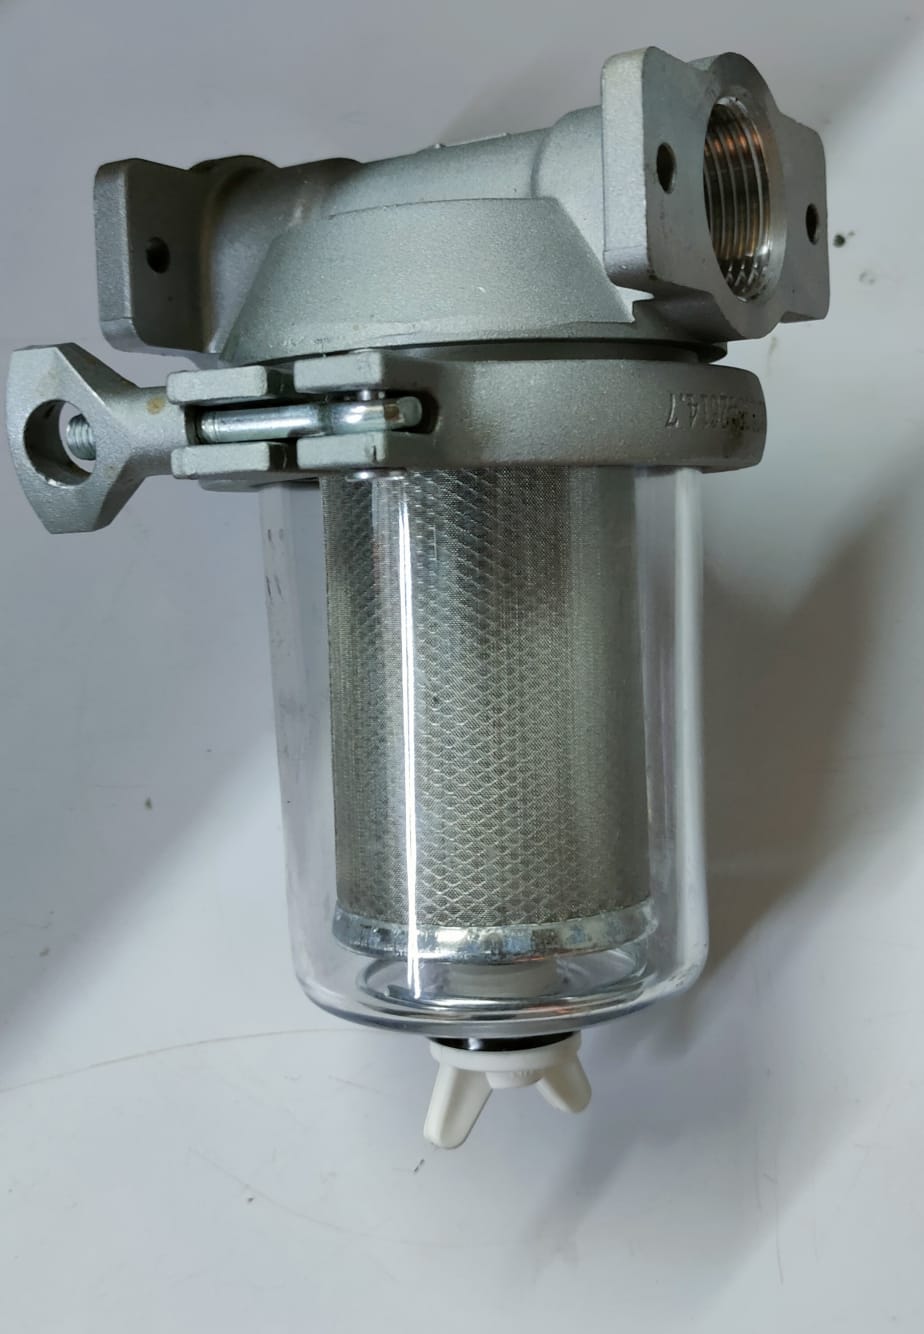 Diesel Fuel Re-Usable Filter for Dispenser with SS Element 1 Inlet Outlet  - Asma Industrial Corporation